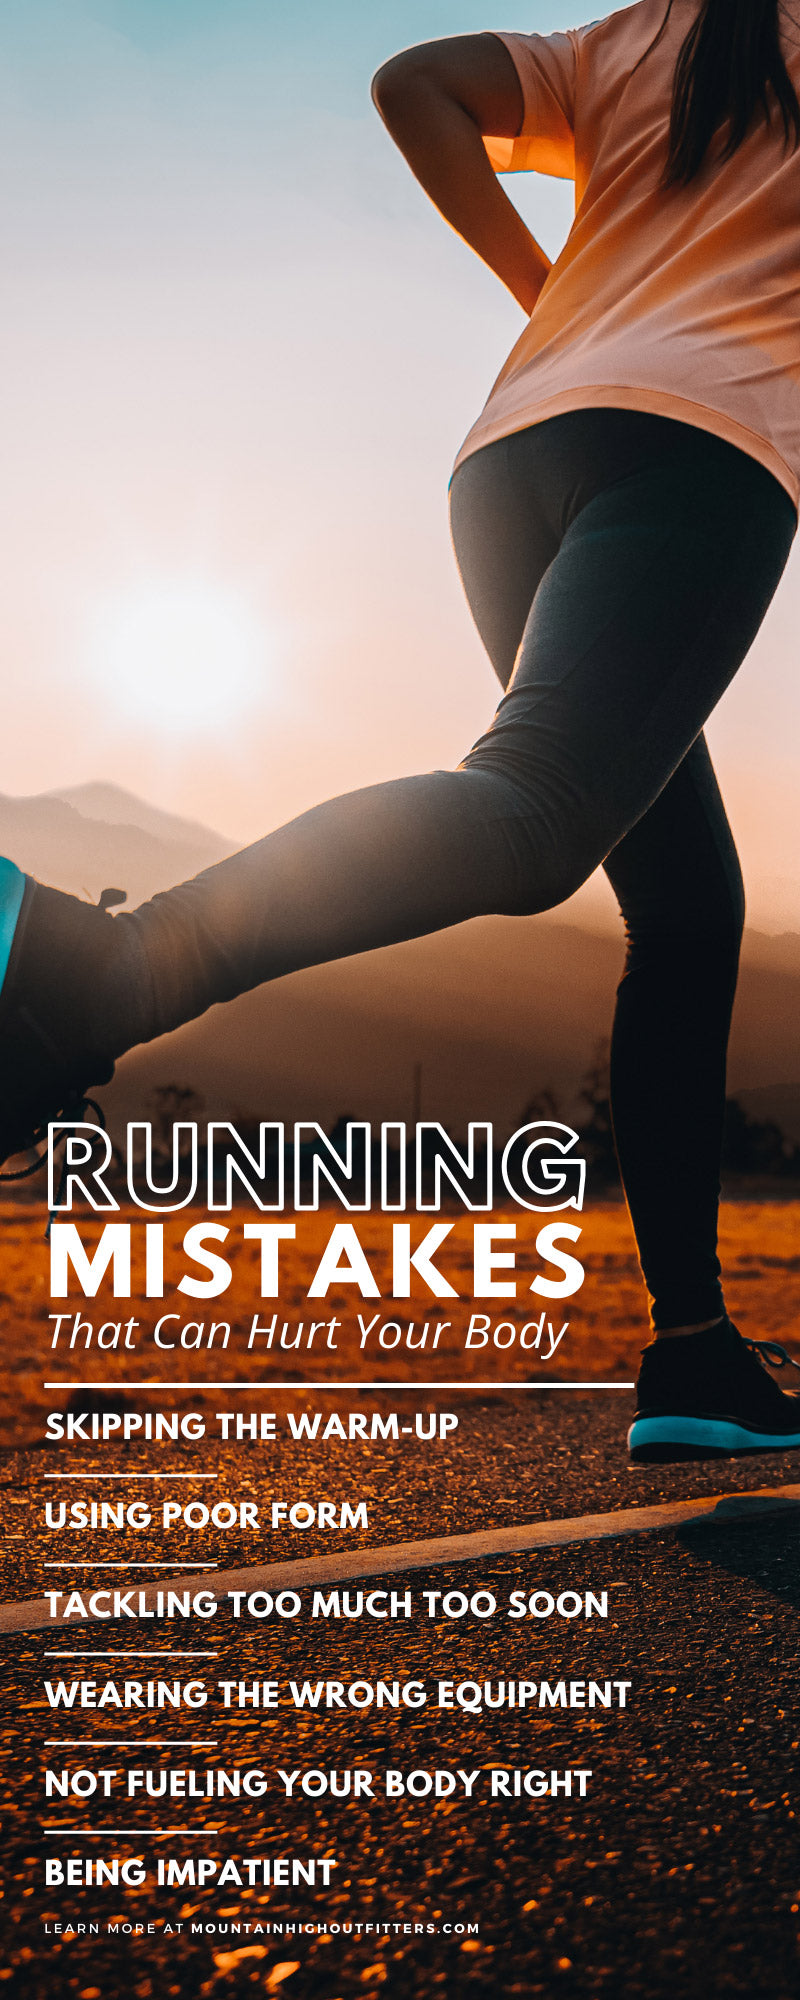 6 Running Mistakes That Can Hurt Your Body